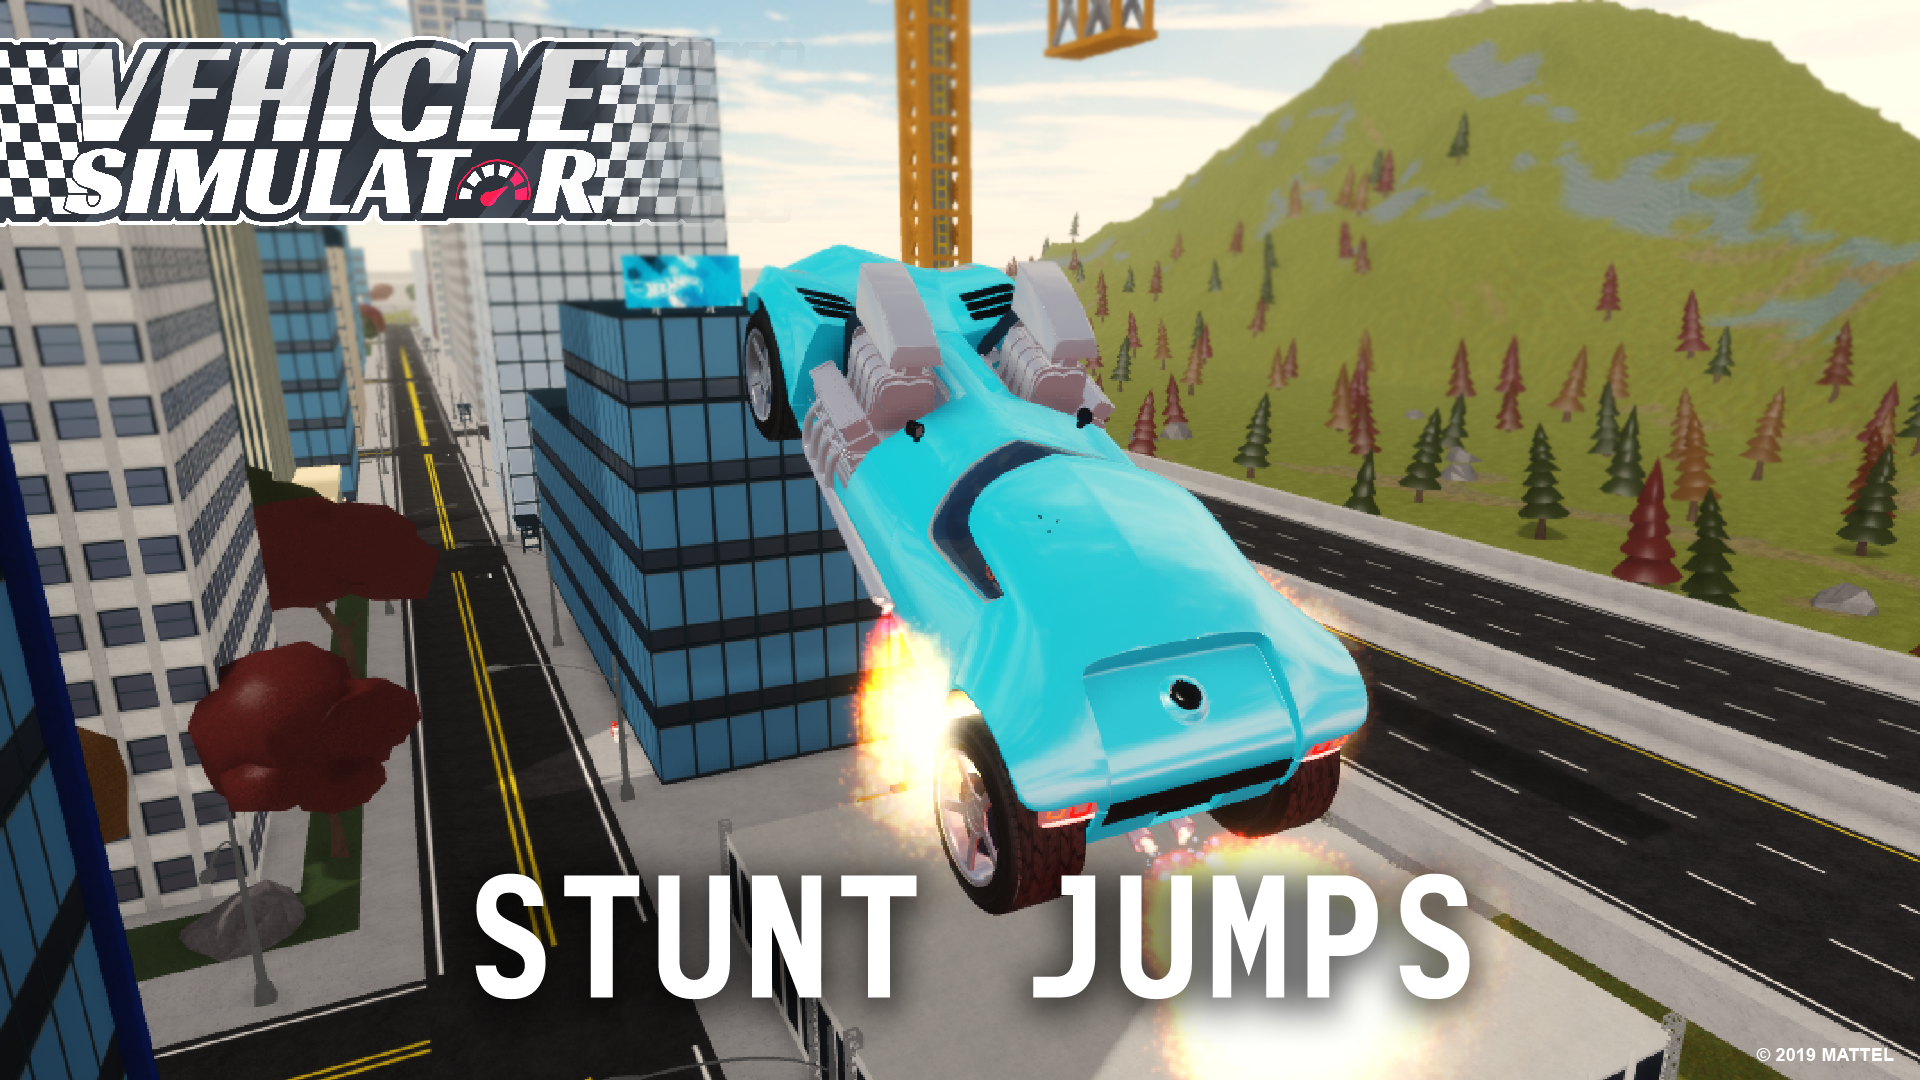 Mattel Revs Up Hot Wheels Fun With 4 New Video Game Updates Gaming Cypher - checking out the monster truck roblox vehicle simulator update